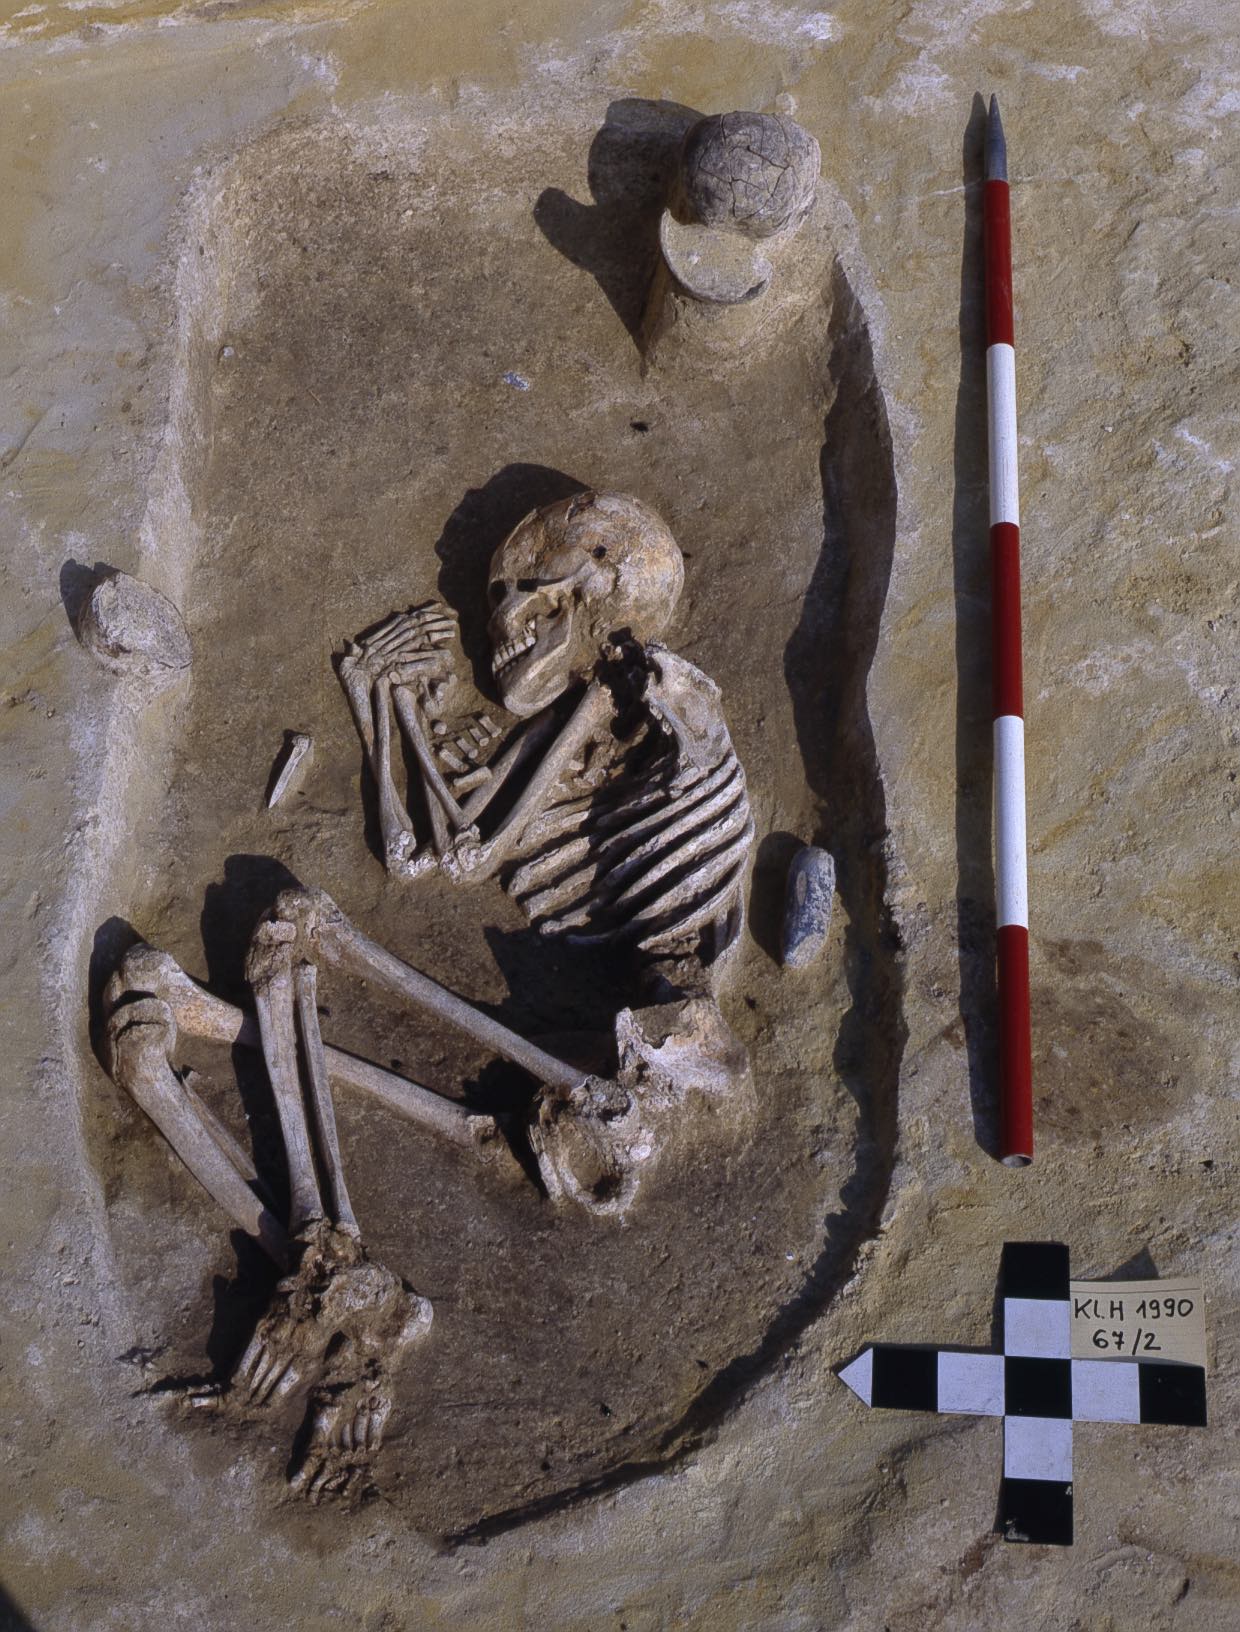 Image of an excavated neolithic skeleton